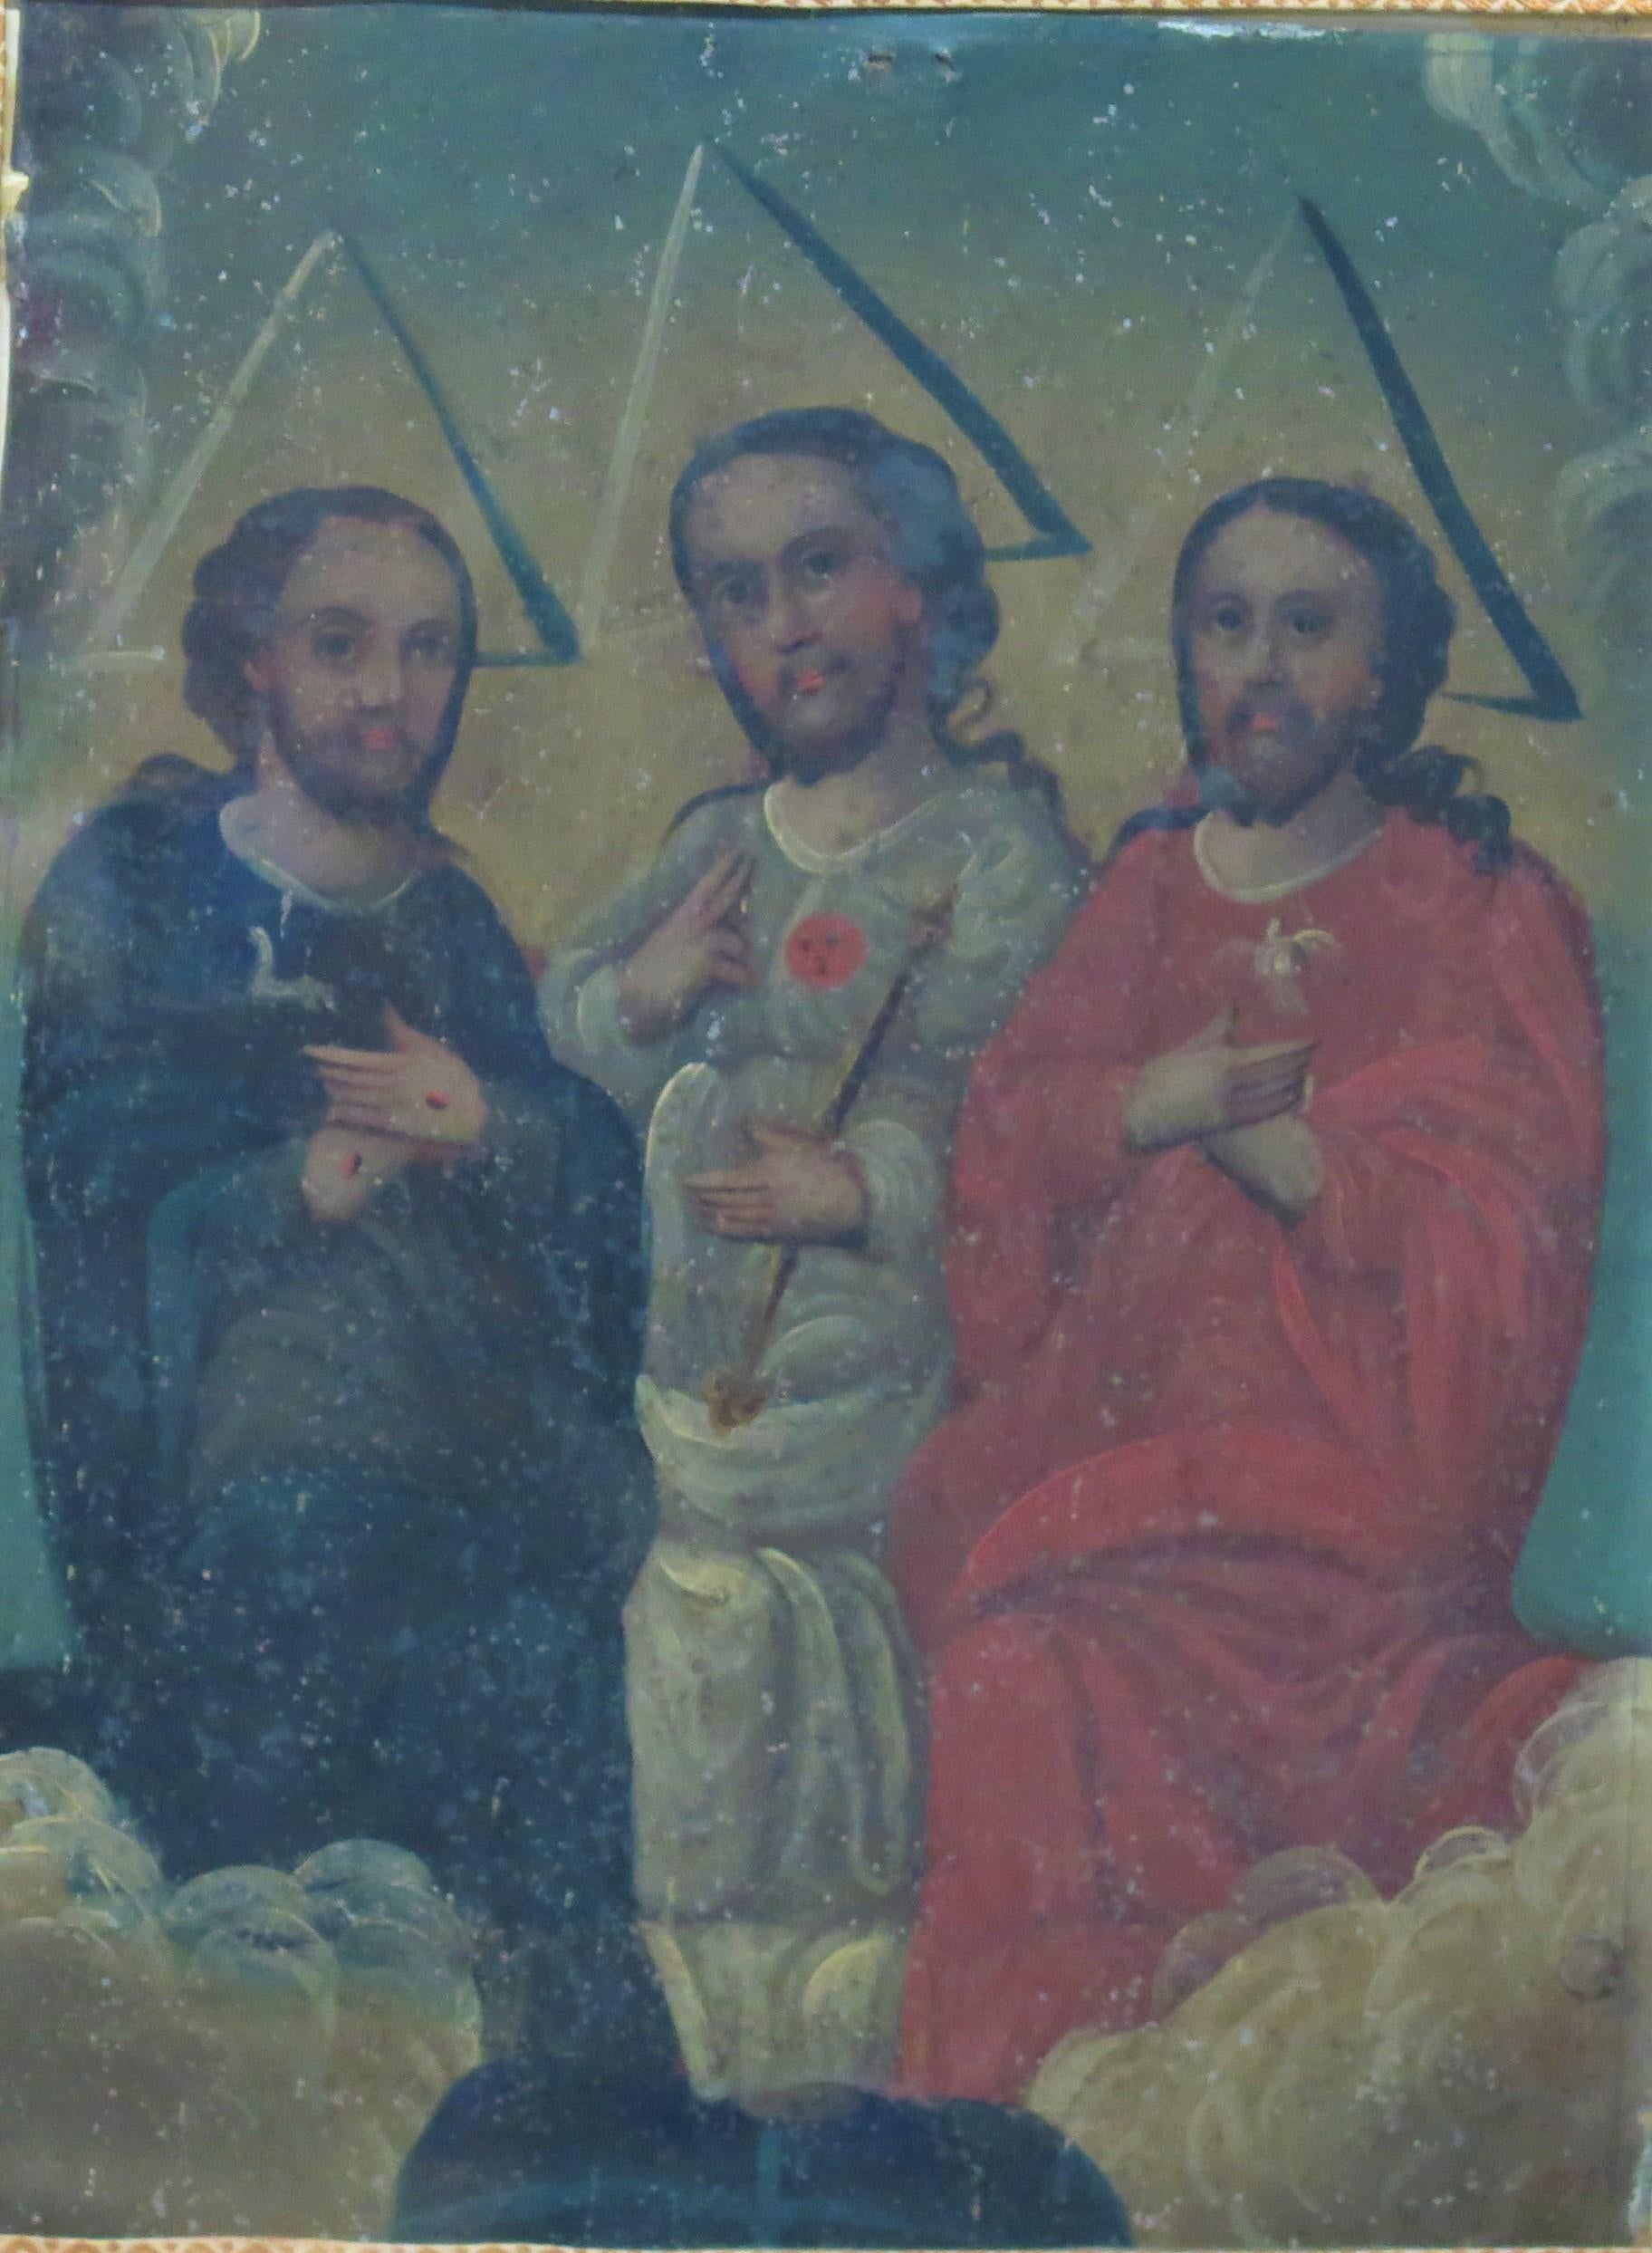 antique Mexican Holy Trinity oil on tin retablo, La Santísima Trinidad, vintage religious Catholic church Folk Art. the three persons of the Trinity are depicted as identical young men, triplets of the same age and size, each distinguishable from